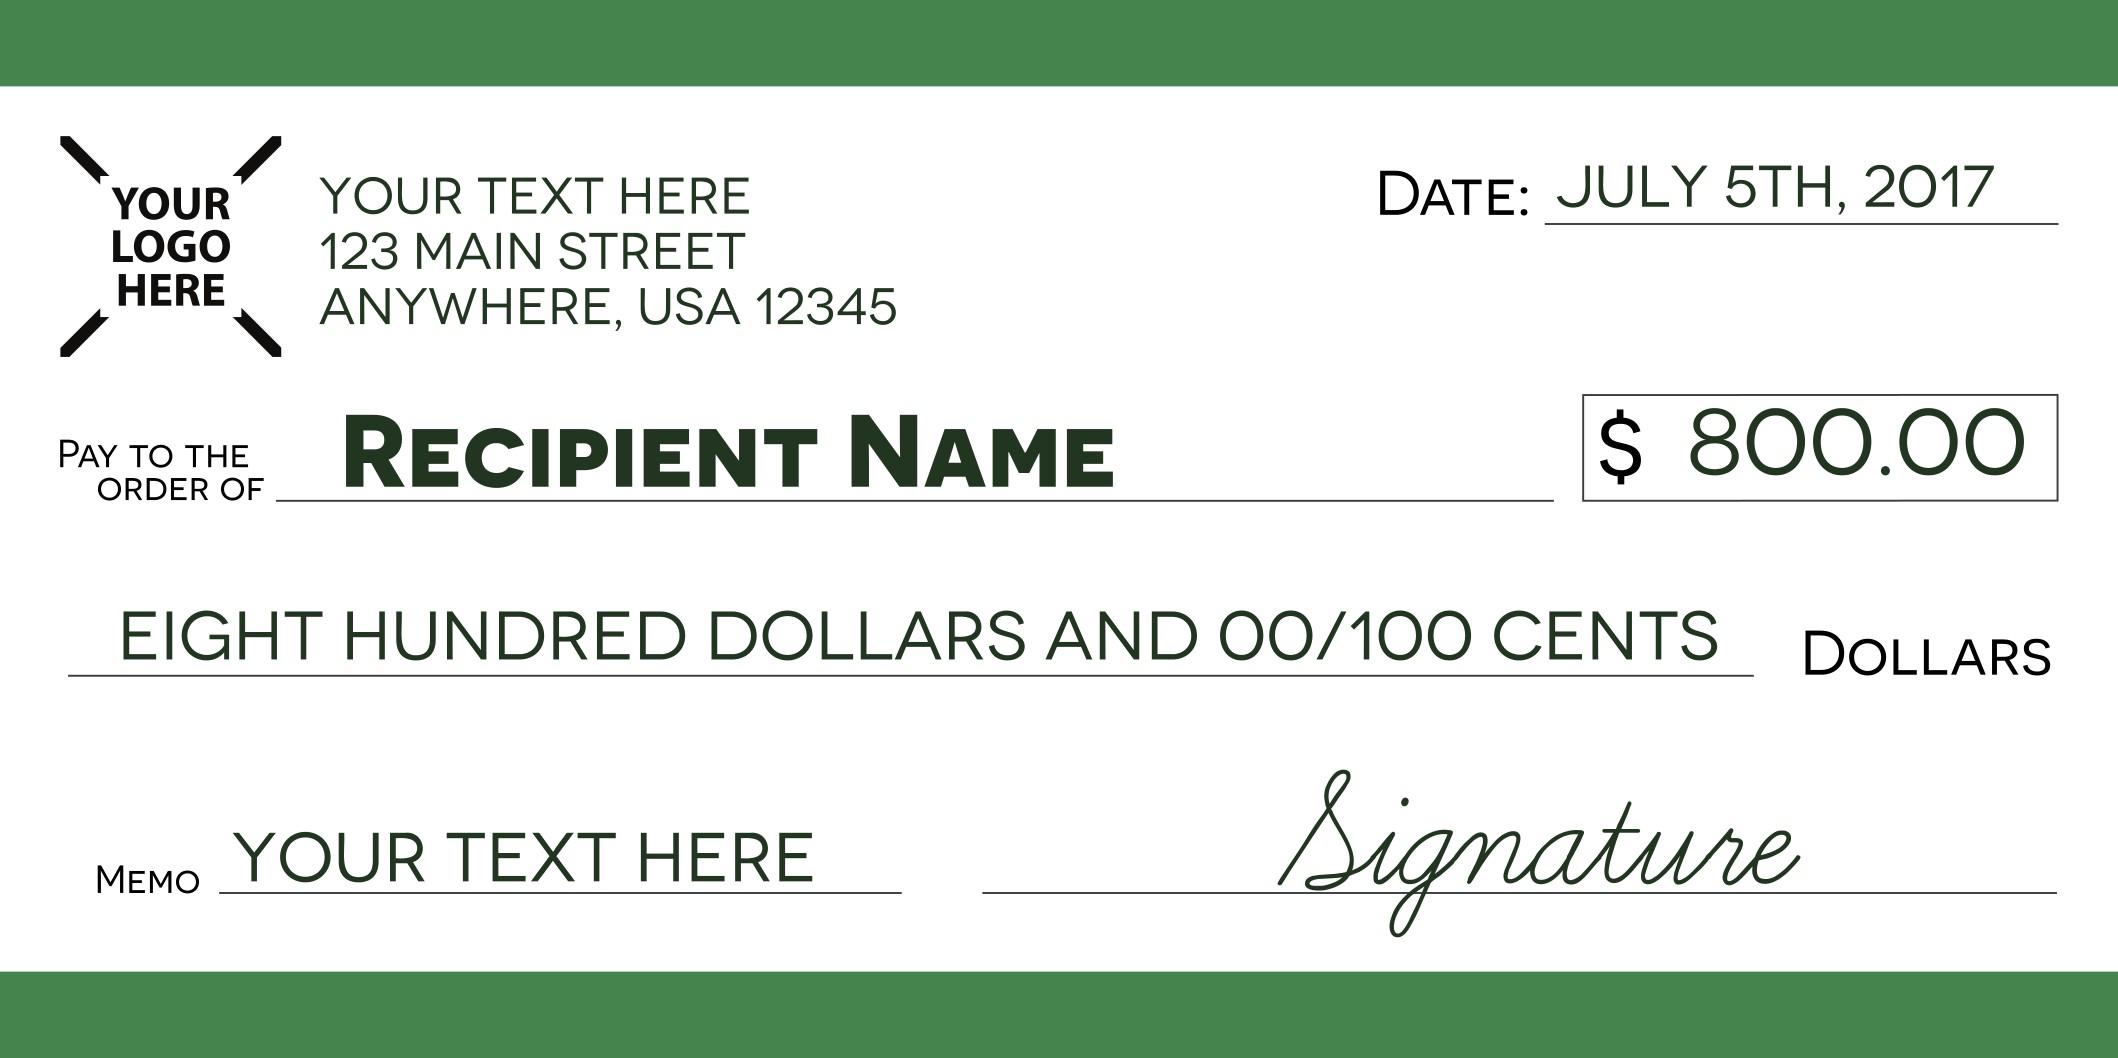 A Large Blank Cheque Template Presentation Checks Free 7 For Large Blank Cheque Template